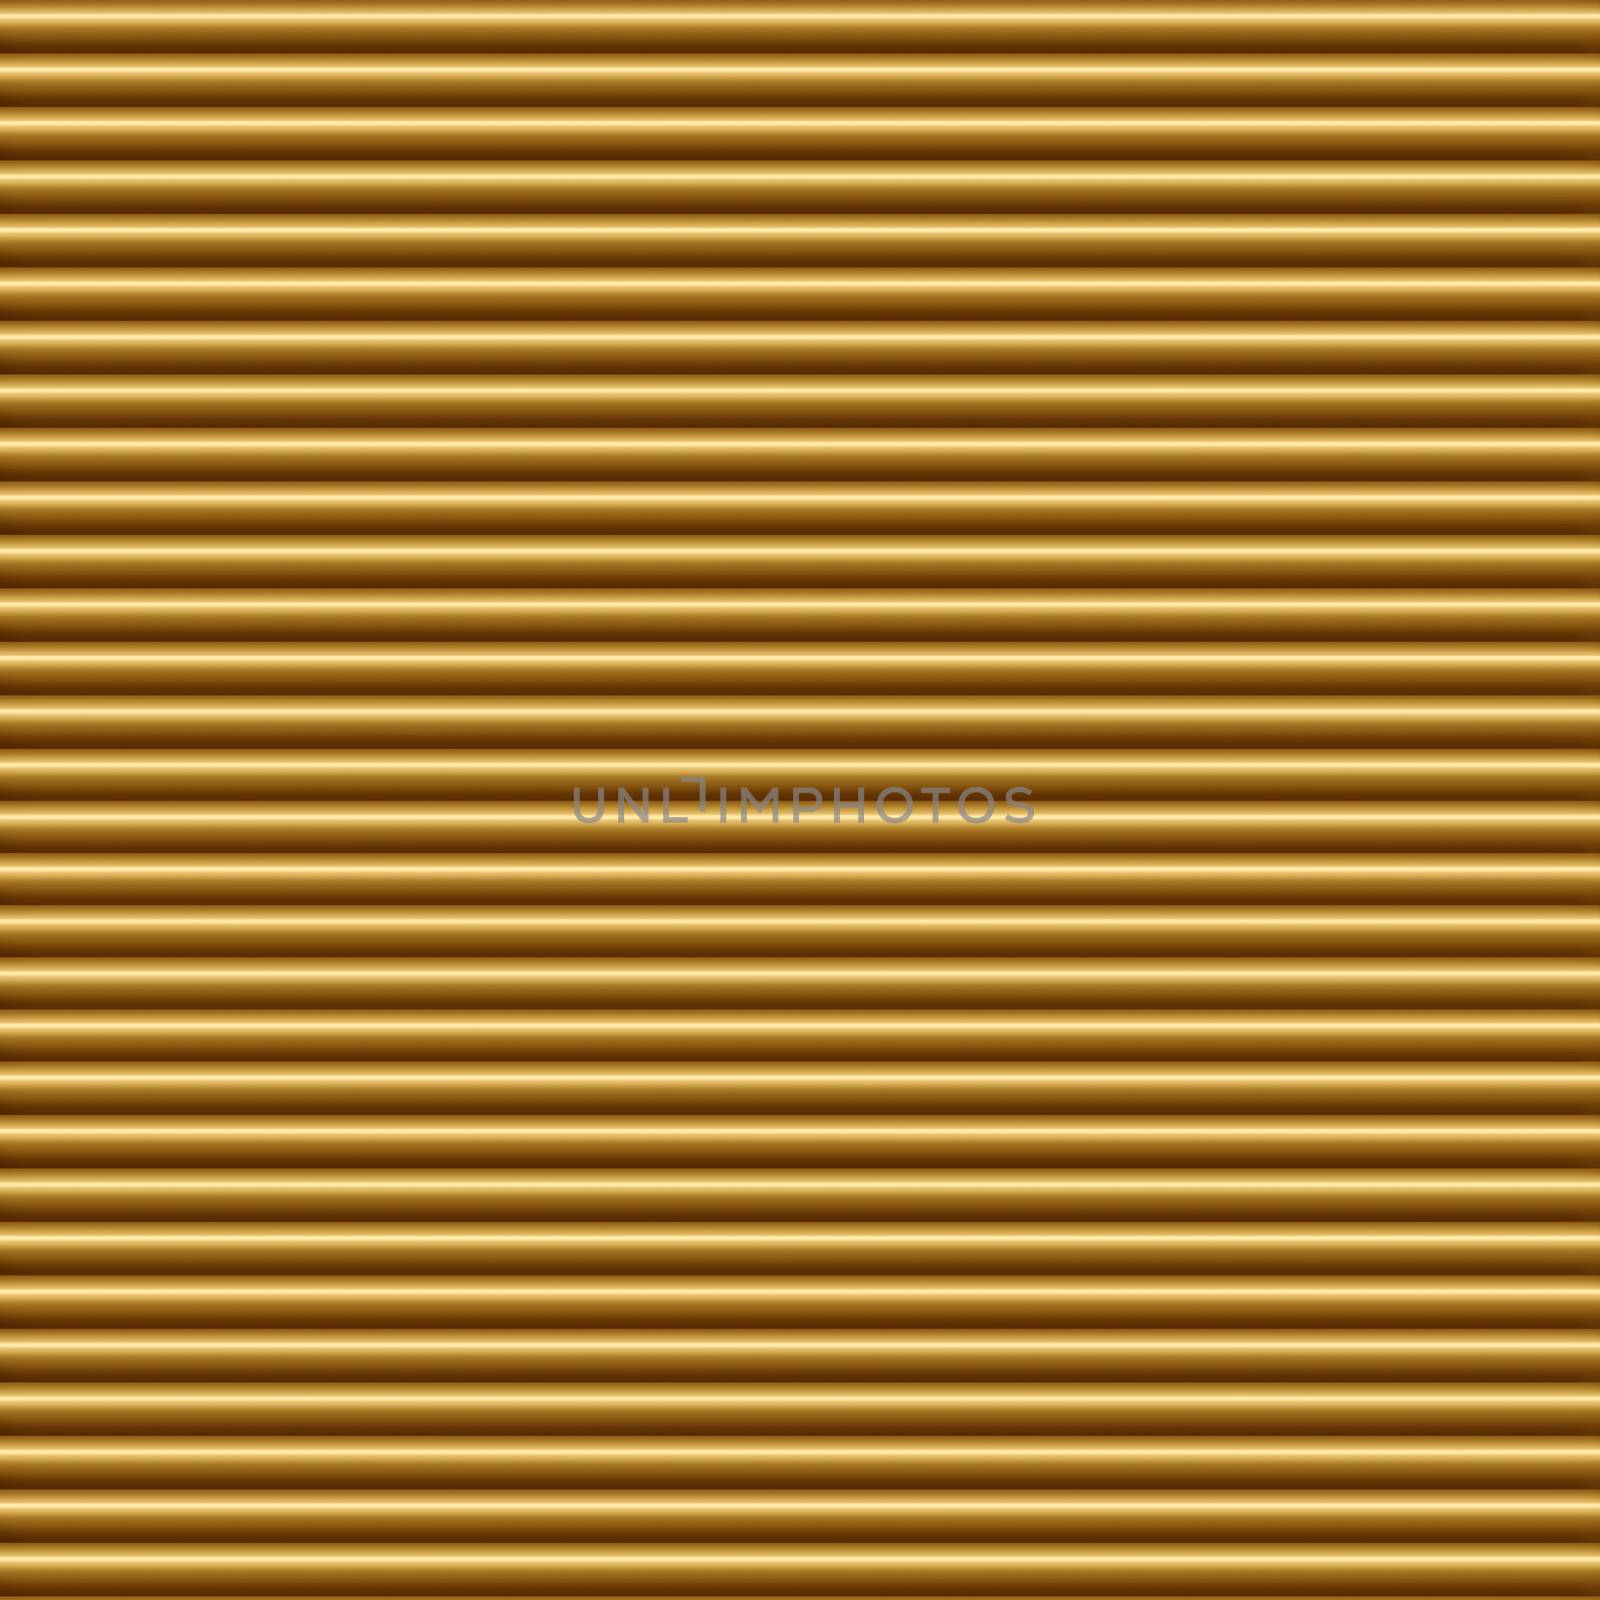 Horizontal gold tube background texture seamlessly tileable